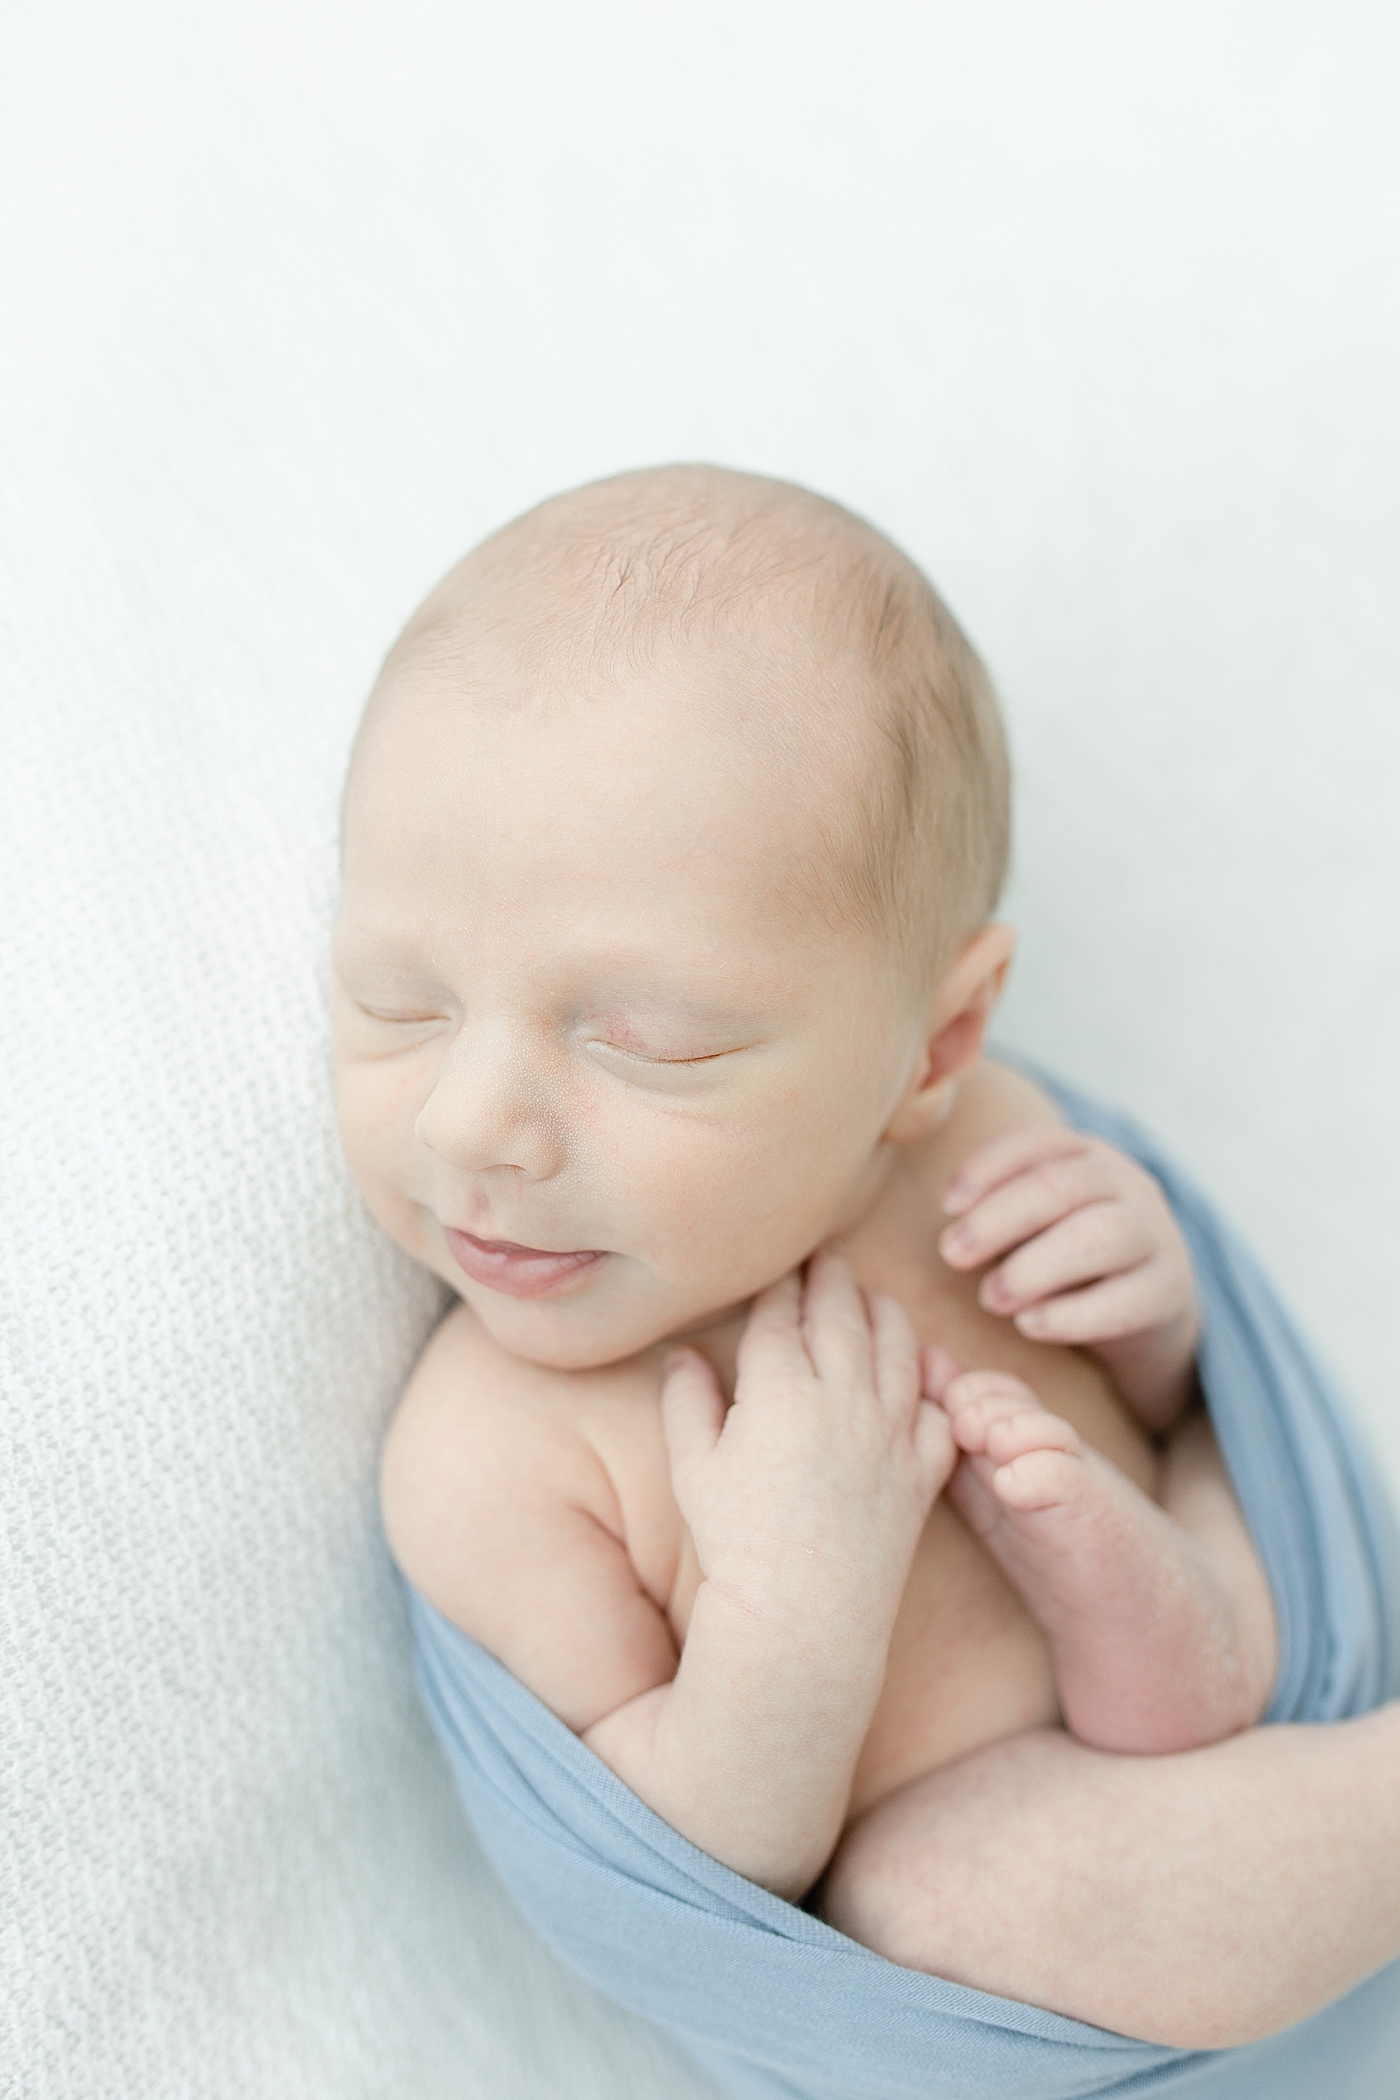 Sleeping newborn baby wrapped in blue swaddle | Photo by Hattiesburg NB photographer Little Sunshine Photography